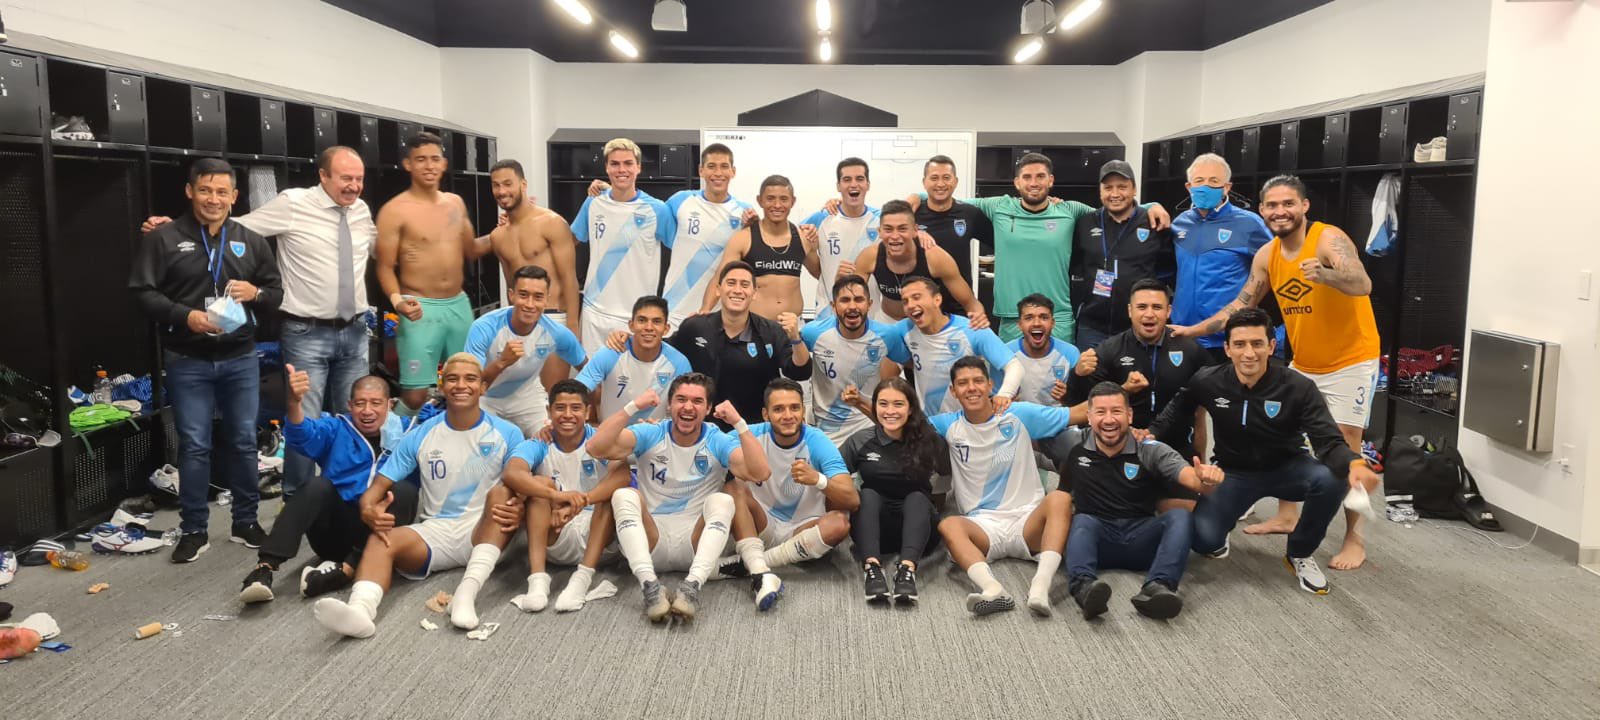 Guatemala national team defeats El Salvador in a friendly match in the United States – Prensa Libre